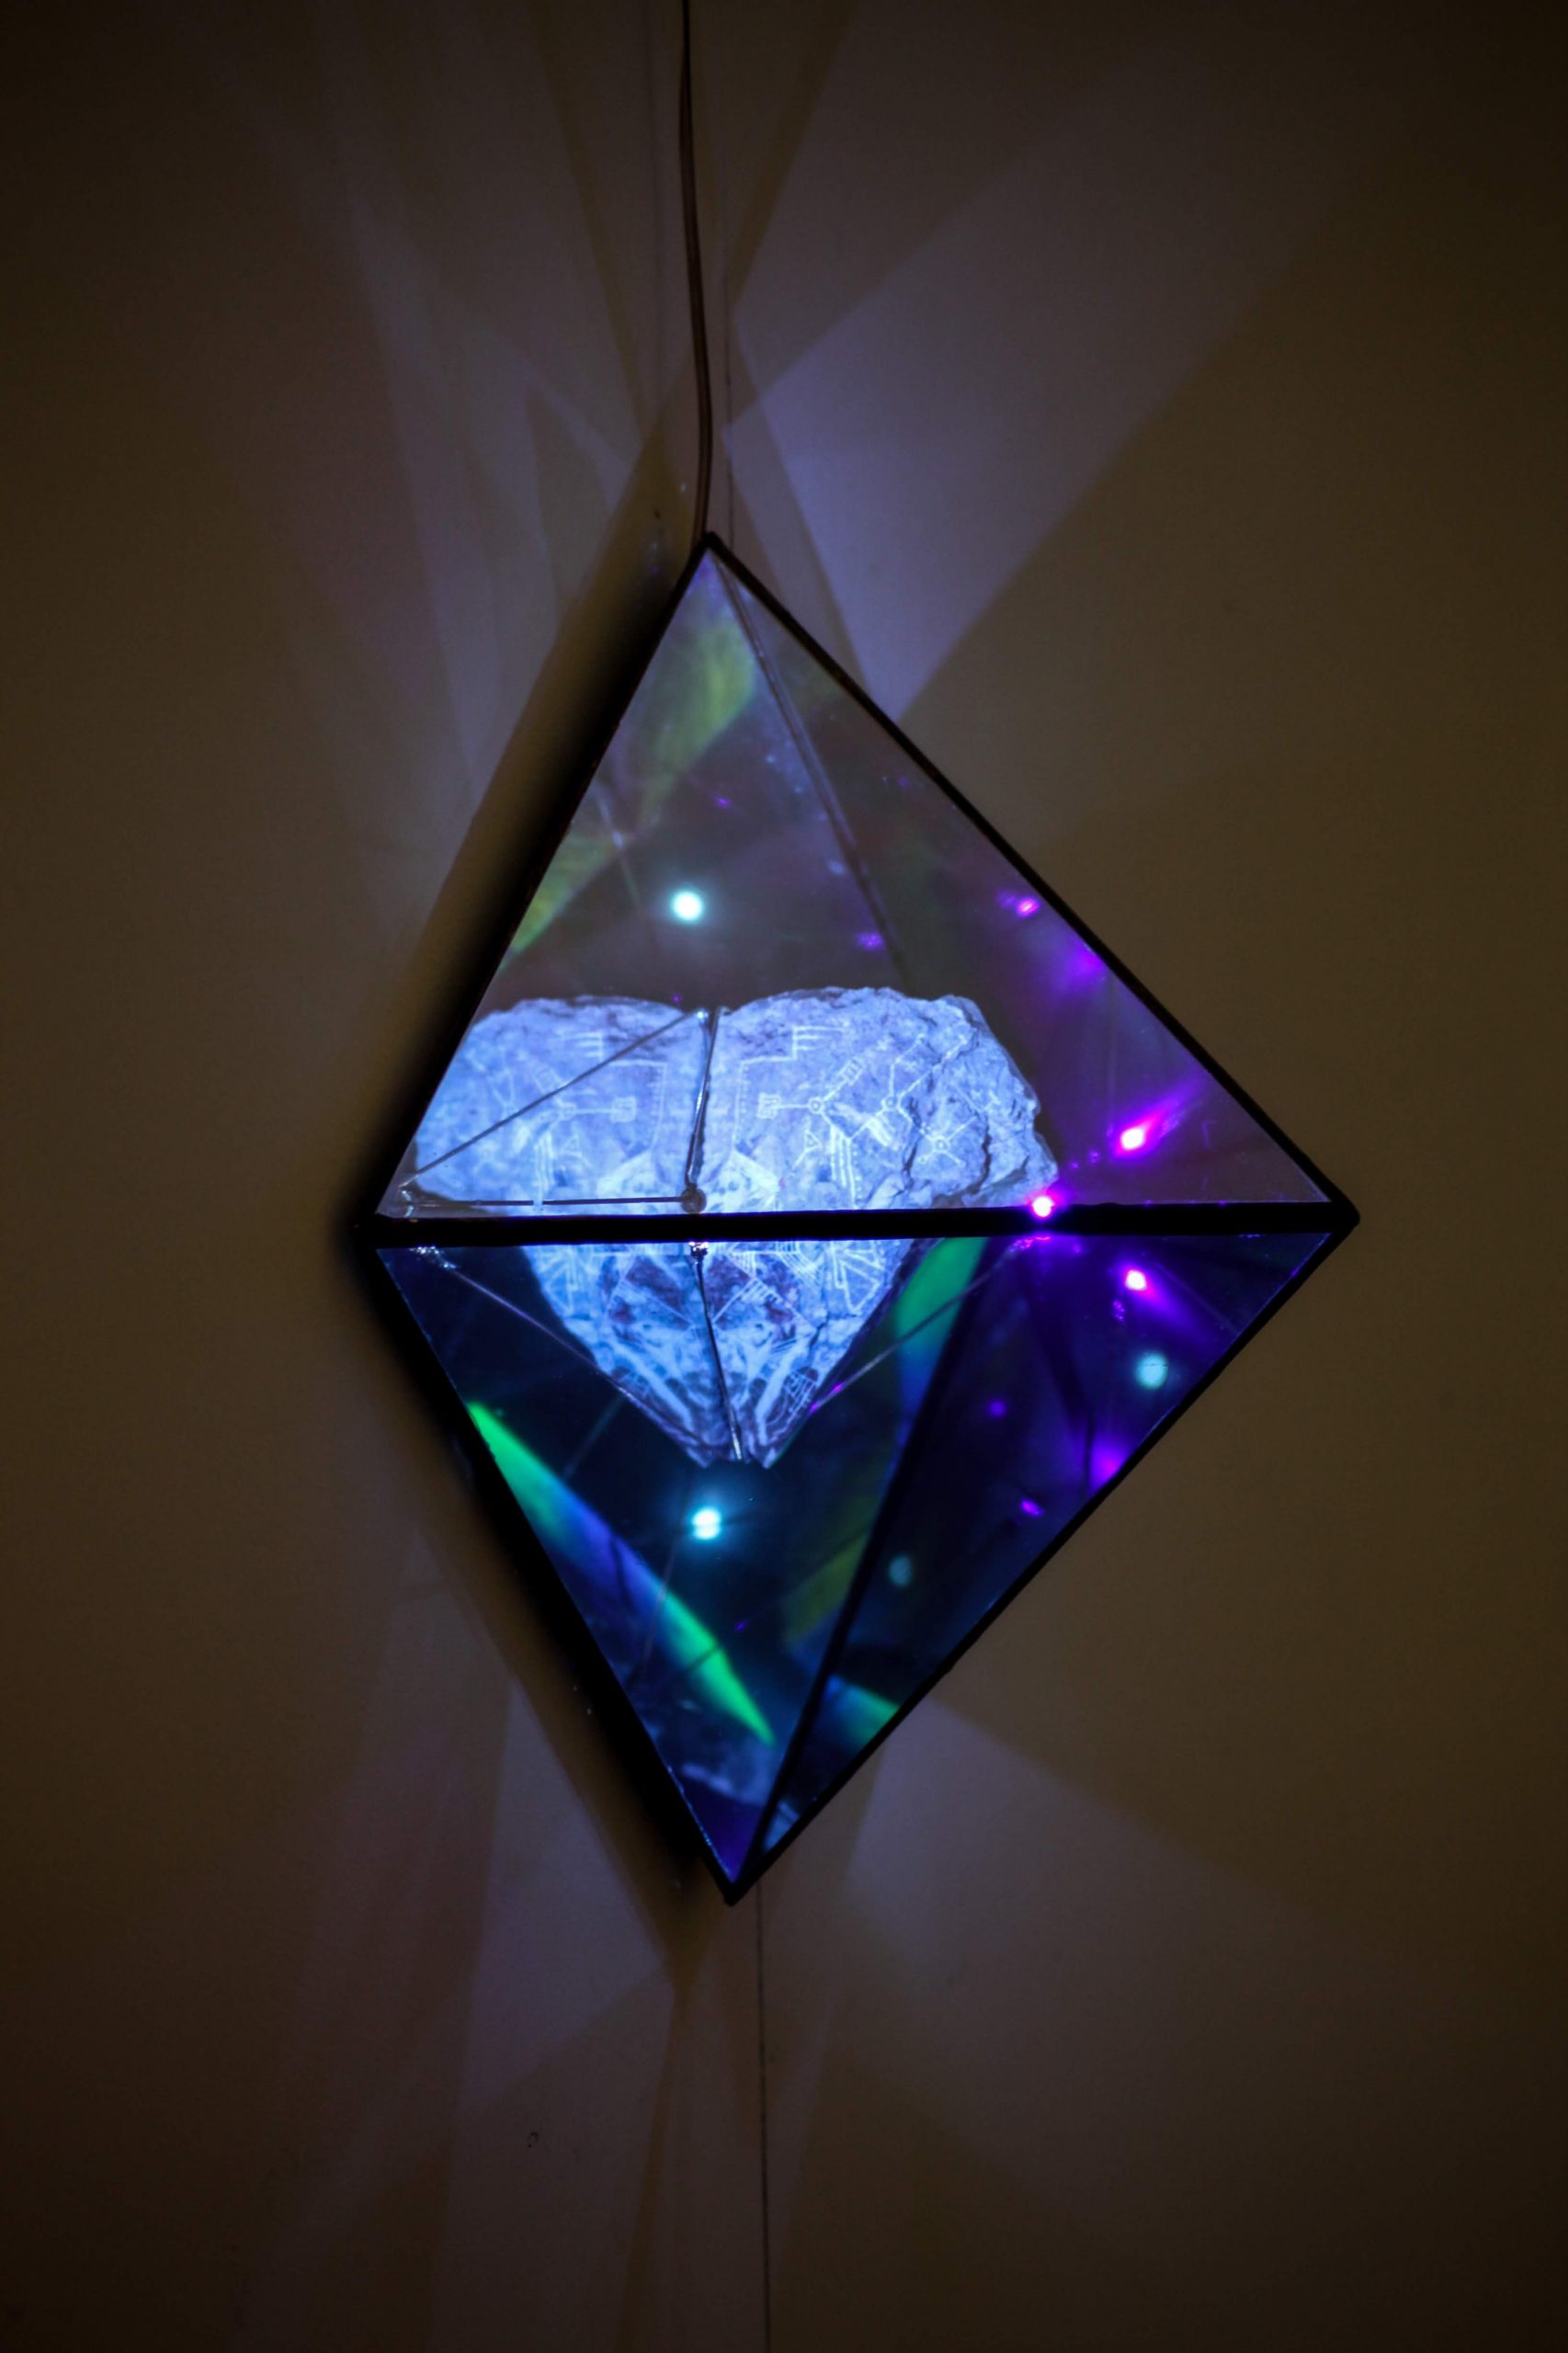 Engraved/UV painted rock, glass and mirror attached to wall with lights refracting from sculpture